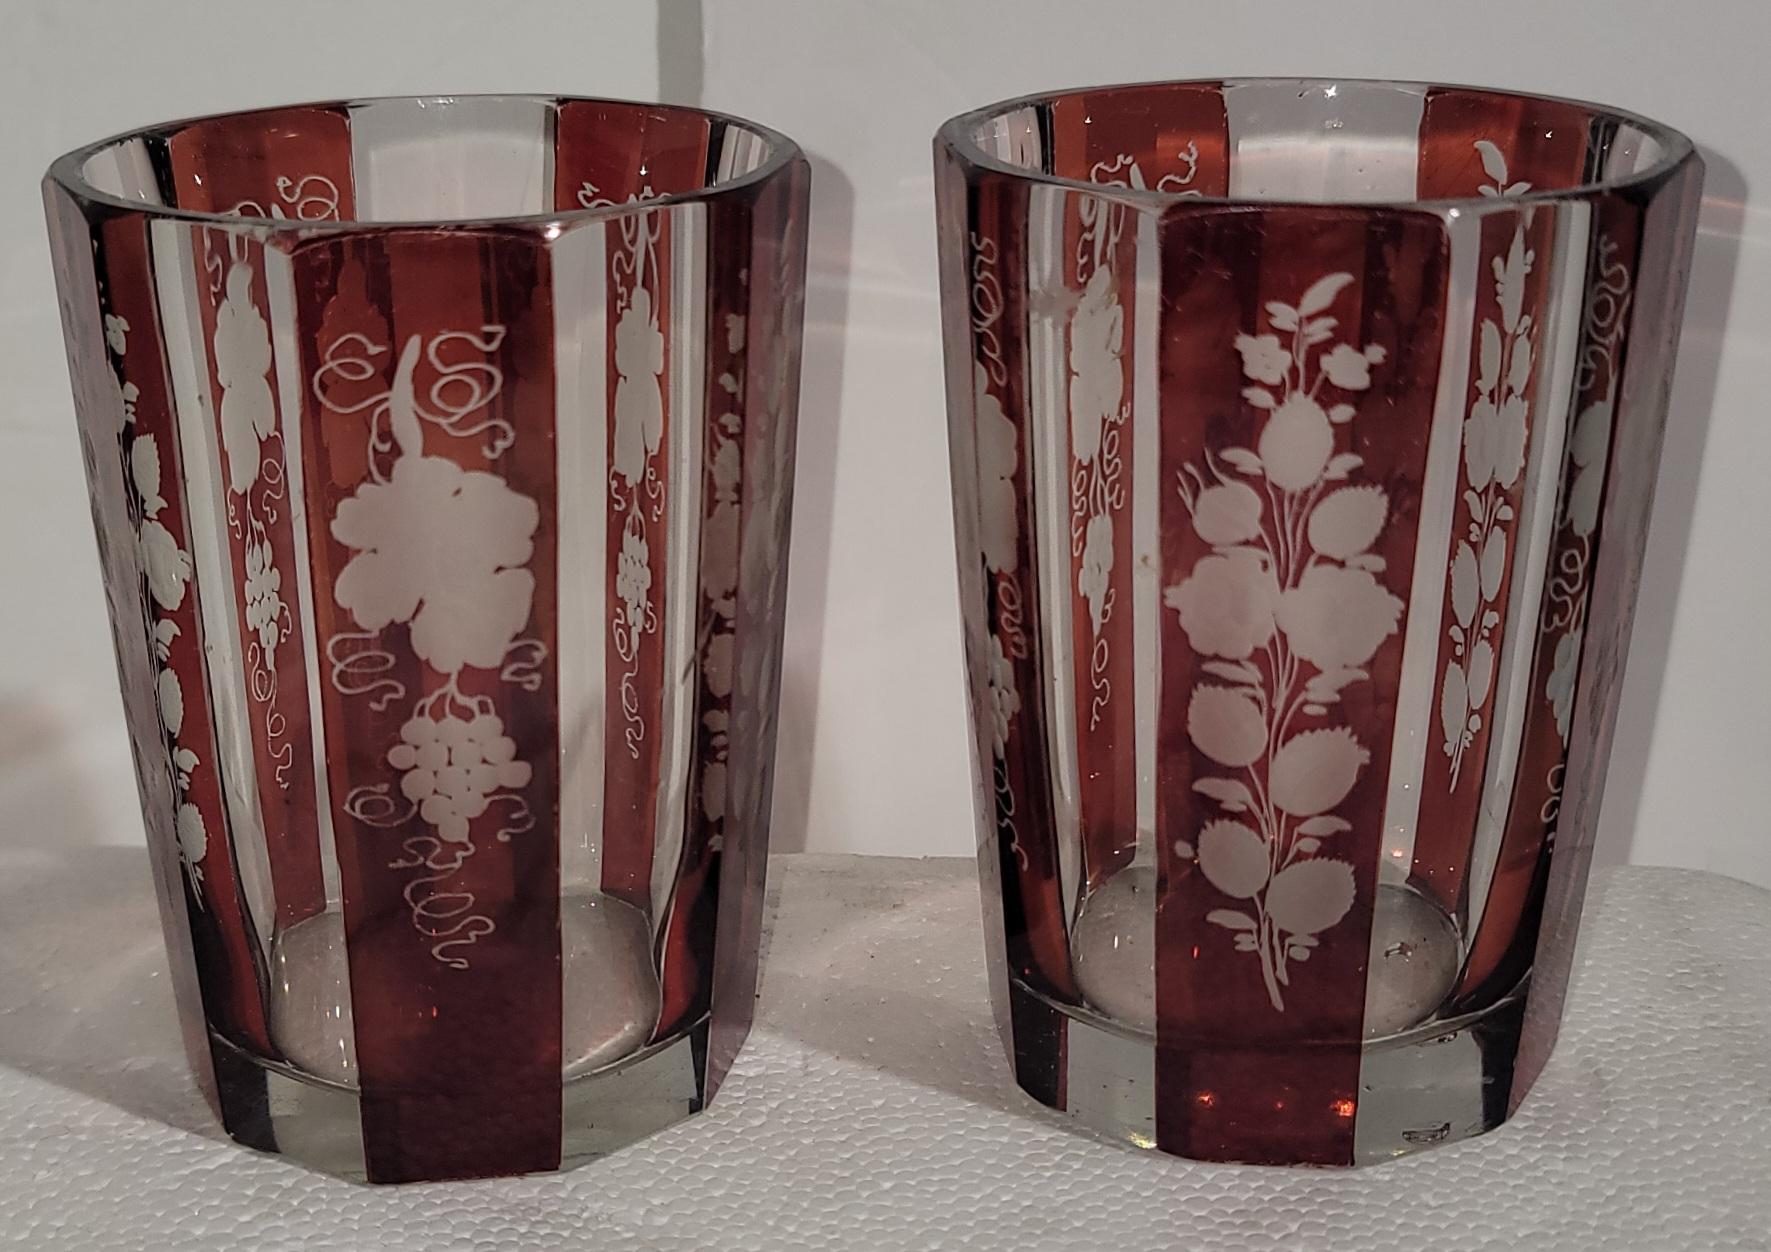 These two tumblers and one goblet are in fine condition and very hard to find.Great addition to any collection.